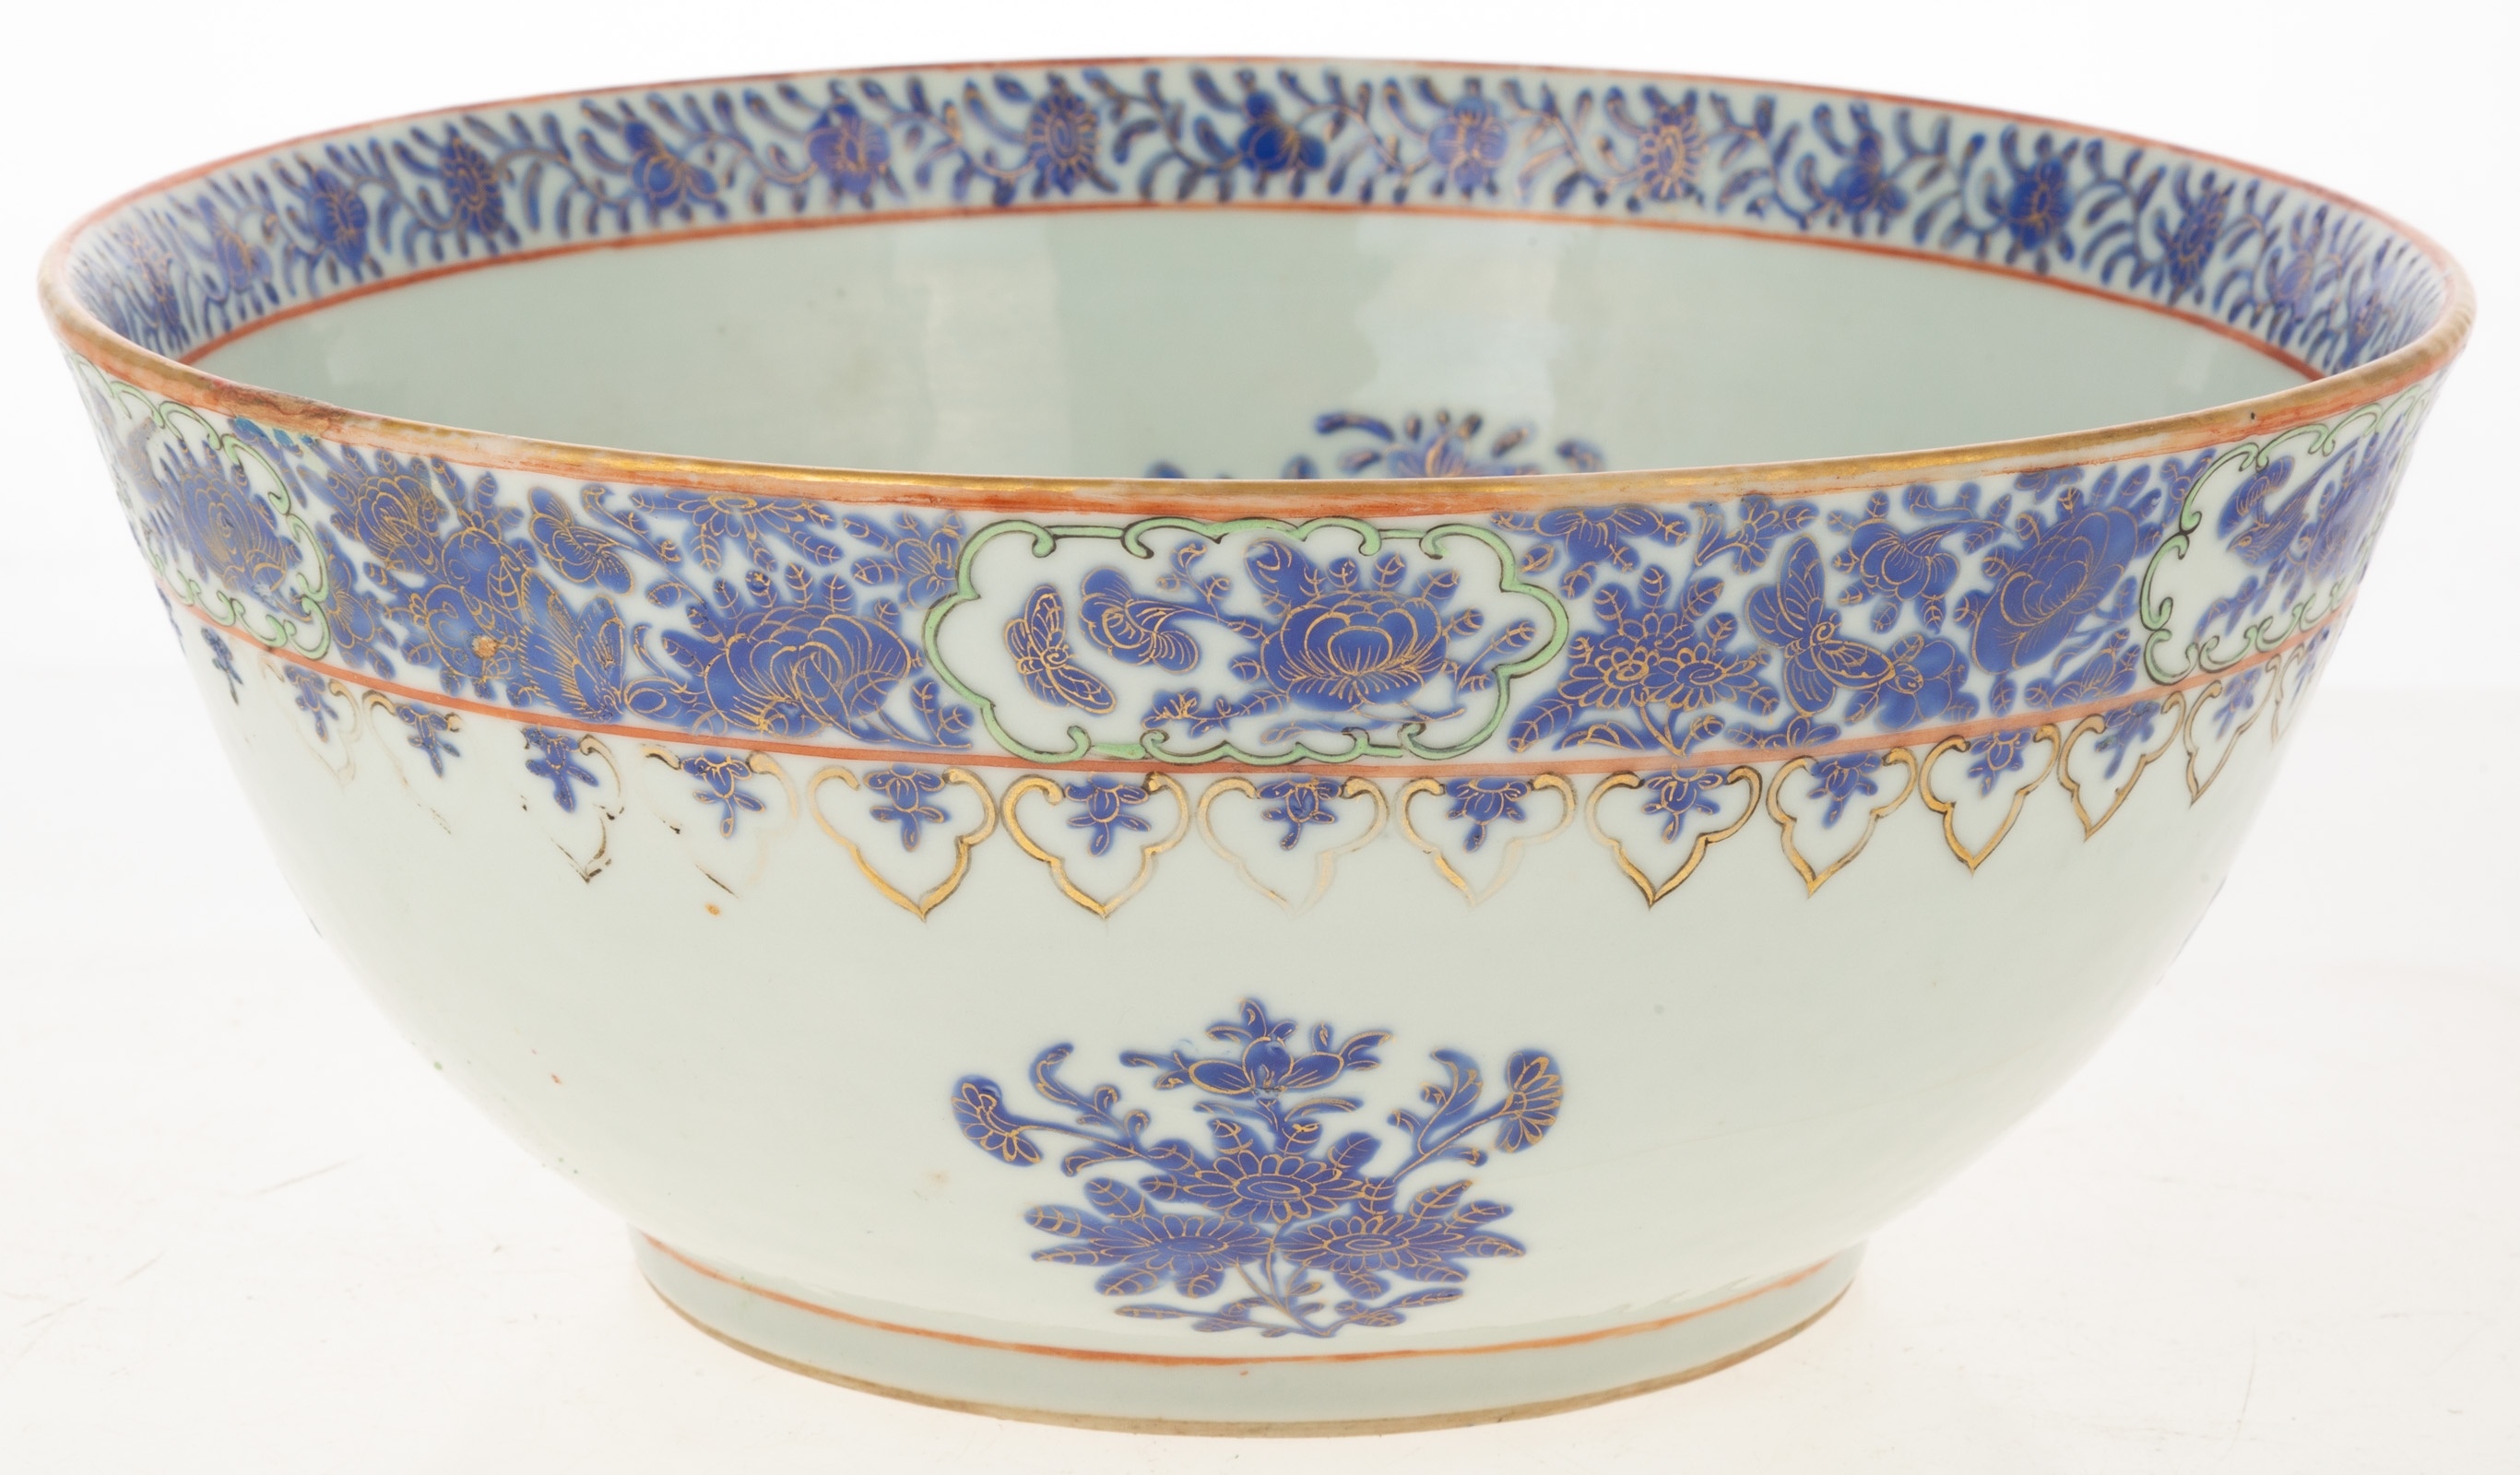 CHINESE EXPORT PORCELAIN BOWL Daoguang